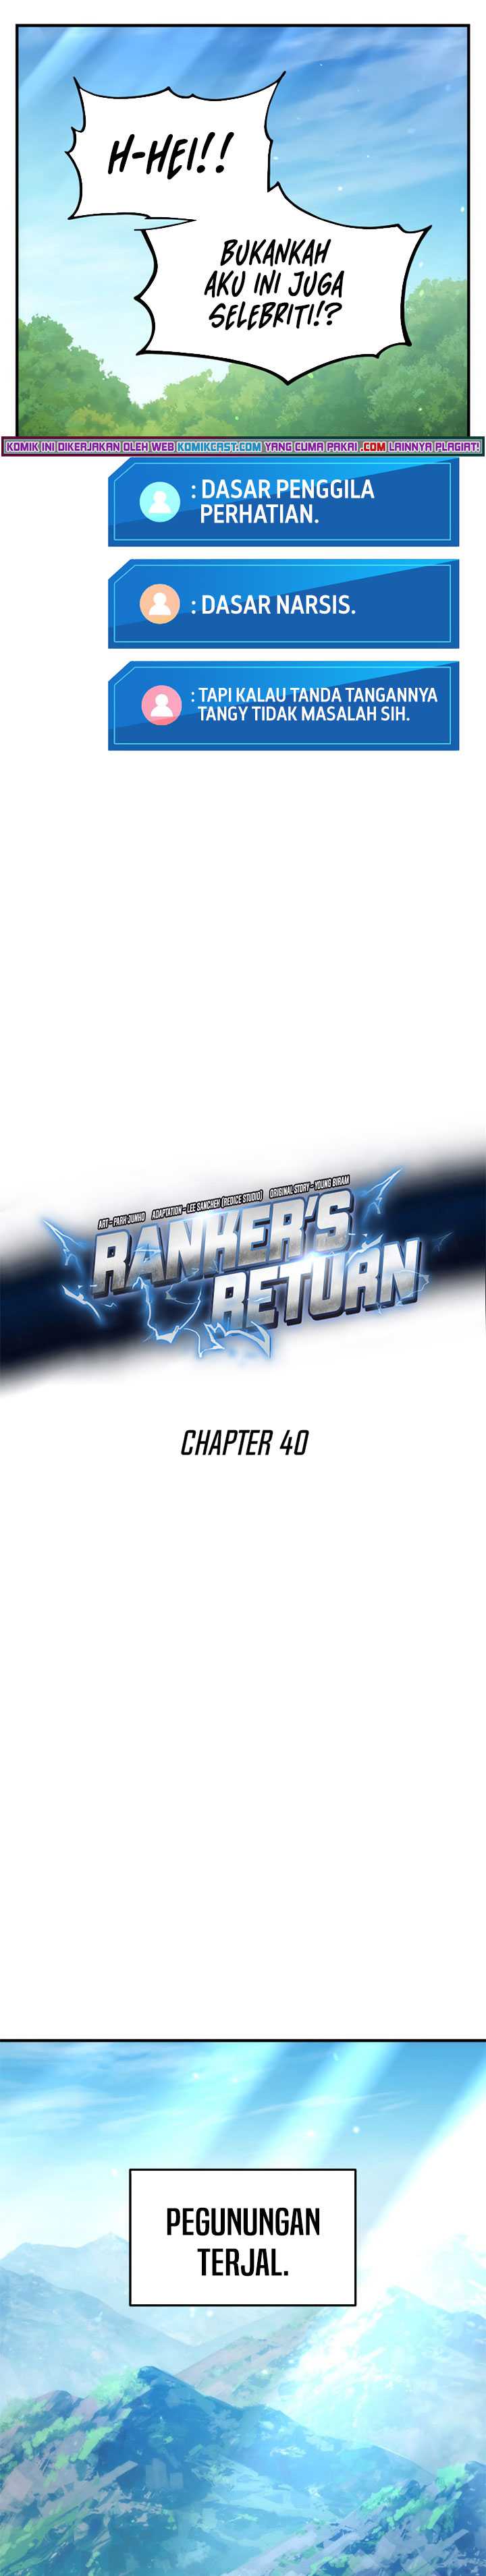 rankers-return-remake Chapter chapter-40